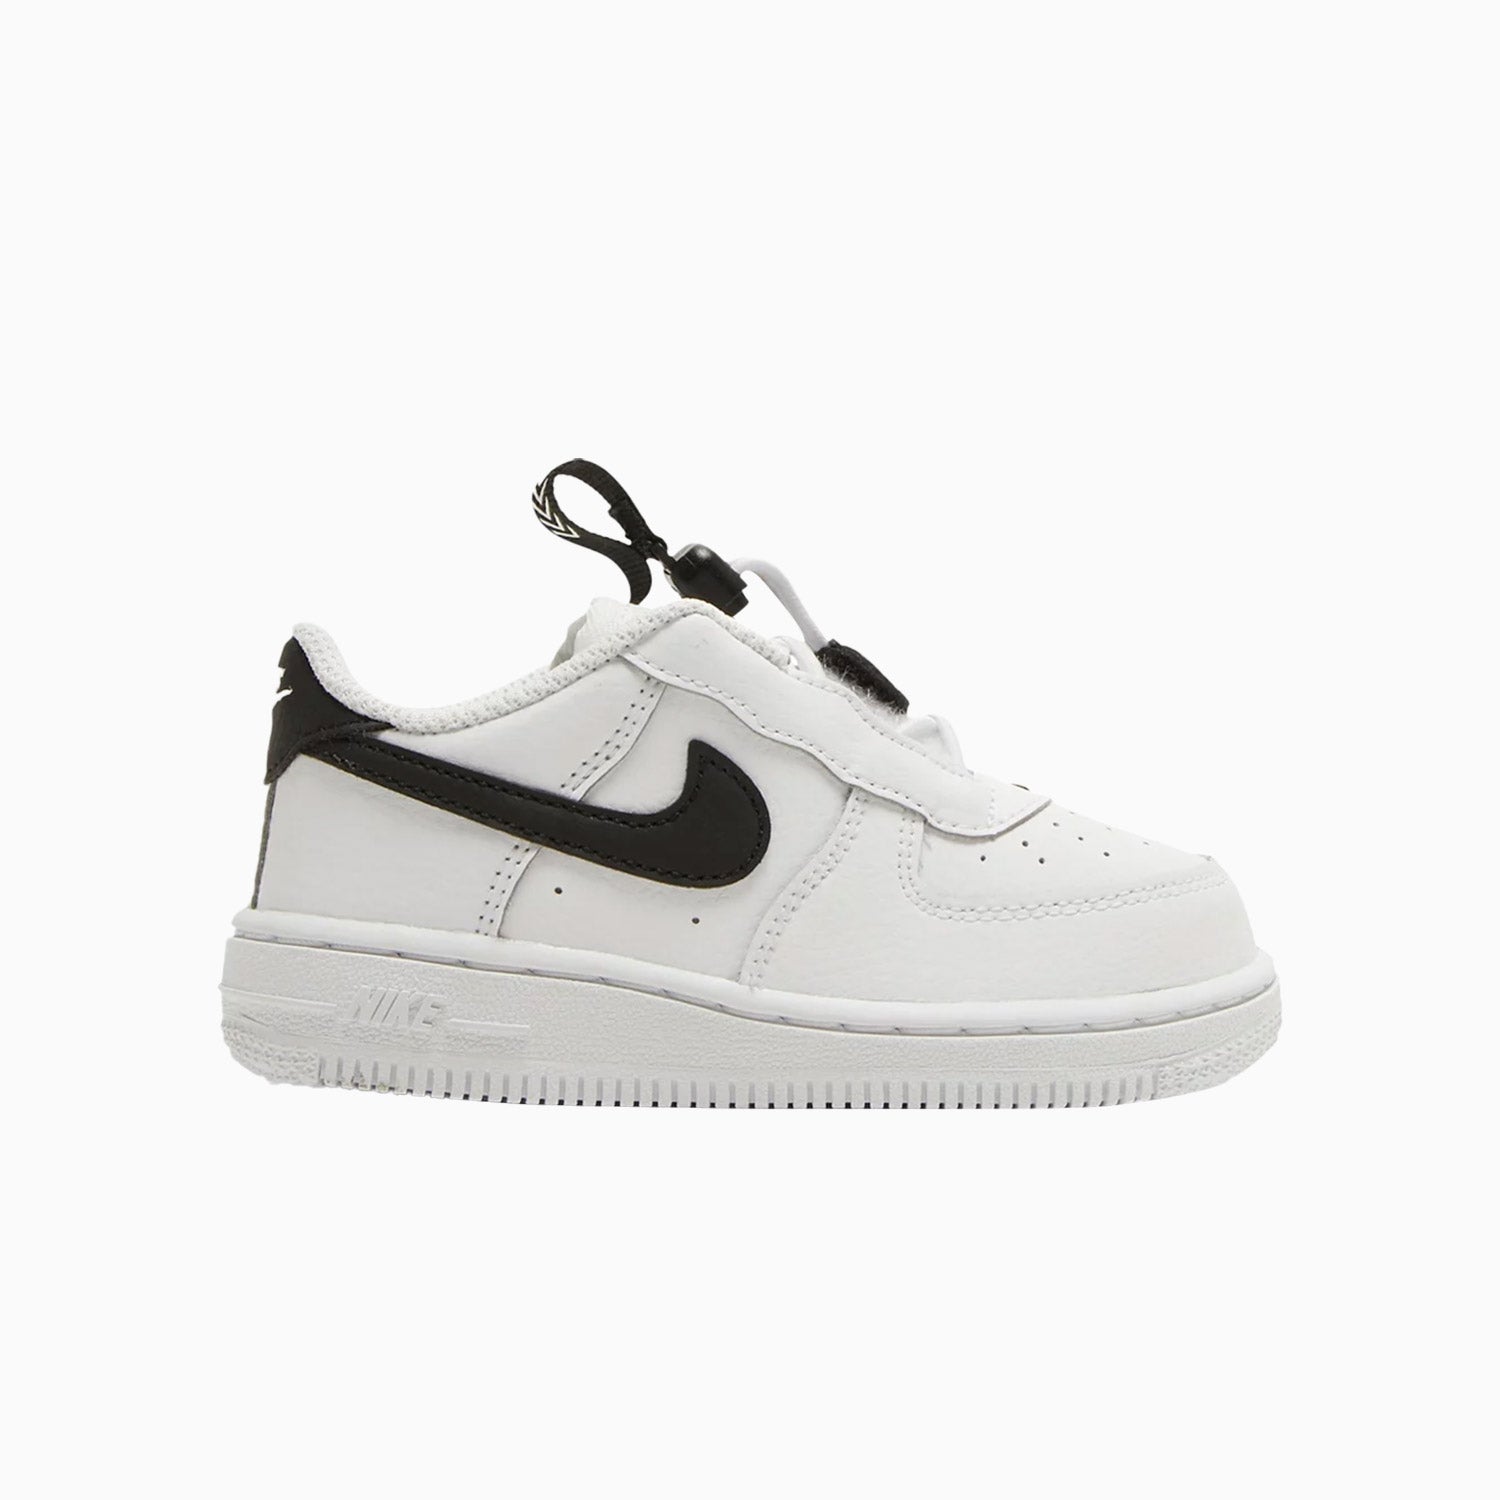 Nike Kid's Air Force 1 Toggle Toddlers - Color: White/Black - Tops and Bottoms USA -